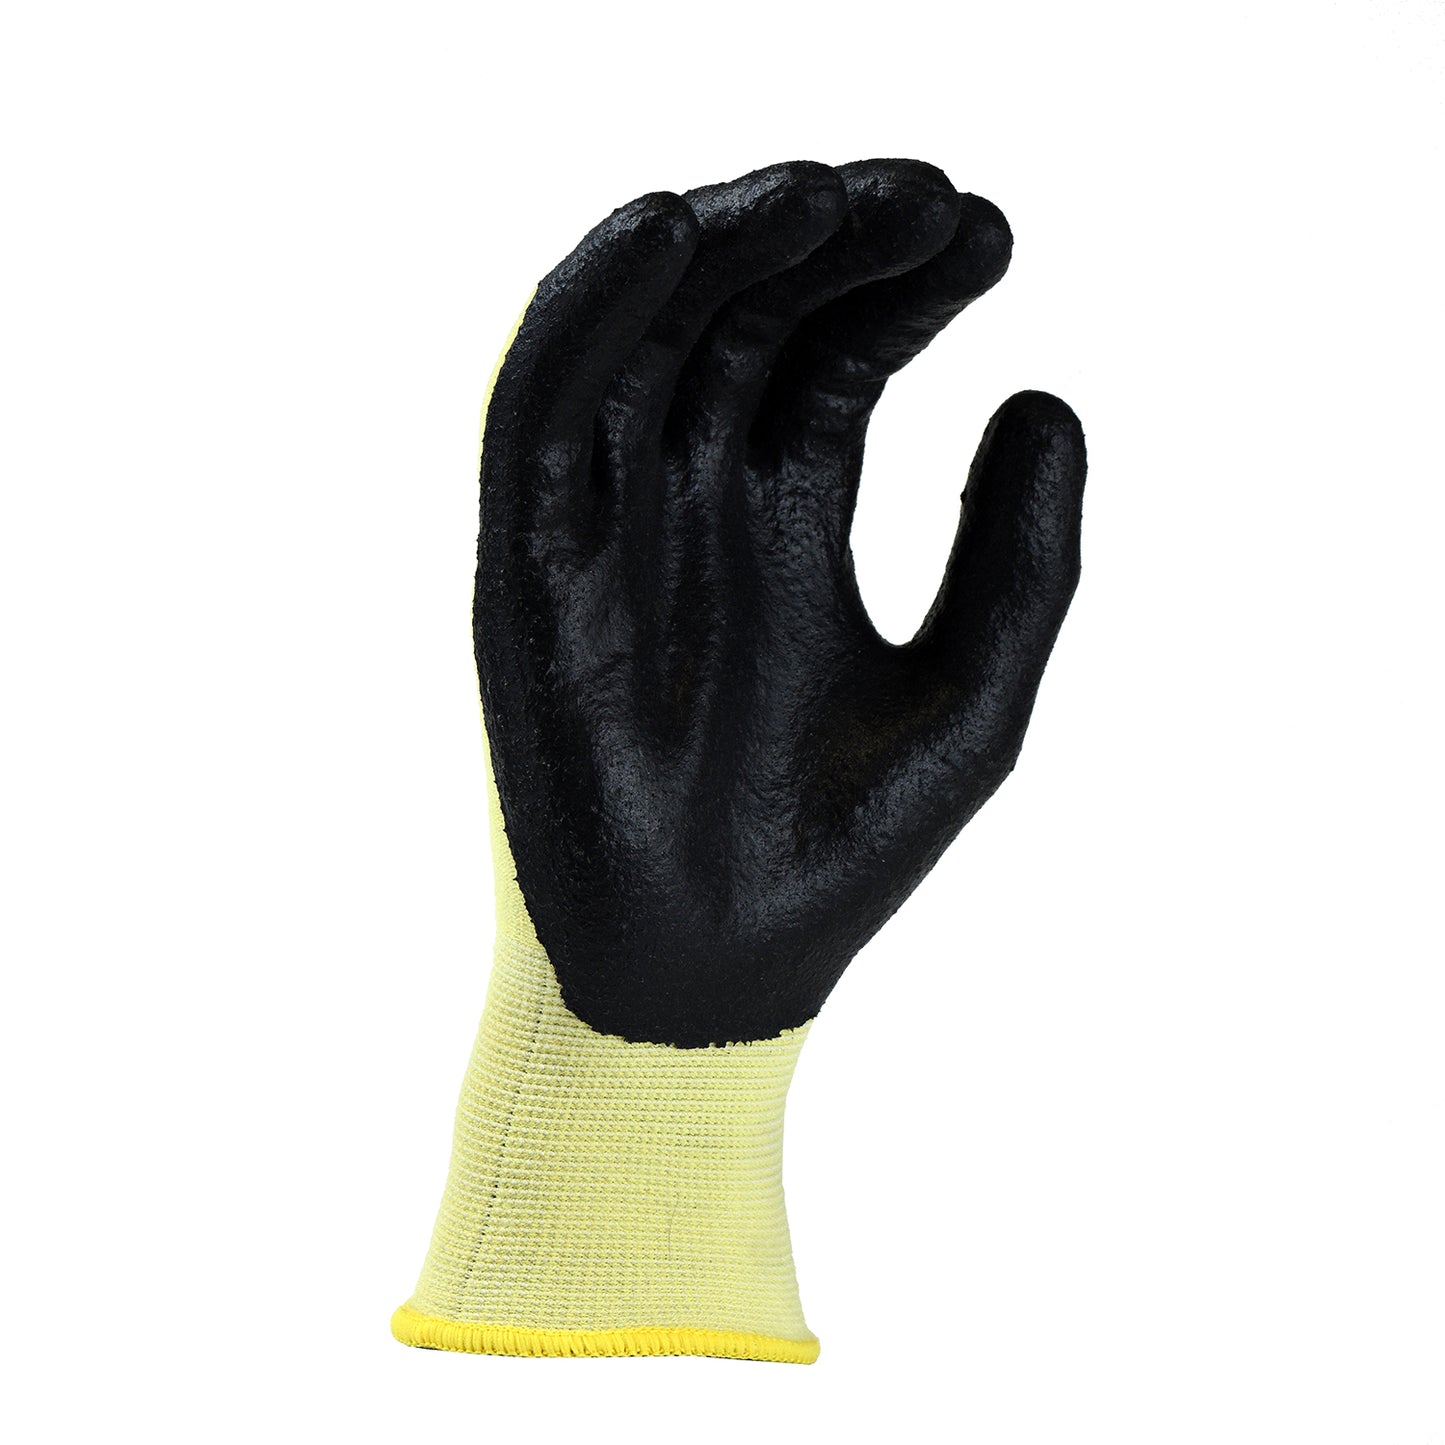 RADIANS RWG537 AXIS™ CUT PROTECTION LEVEL A2 KEVLAR WORK GLOVE